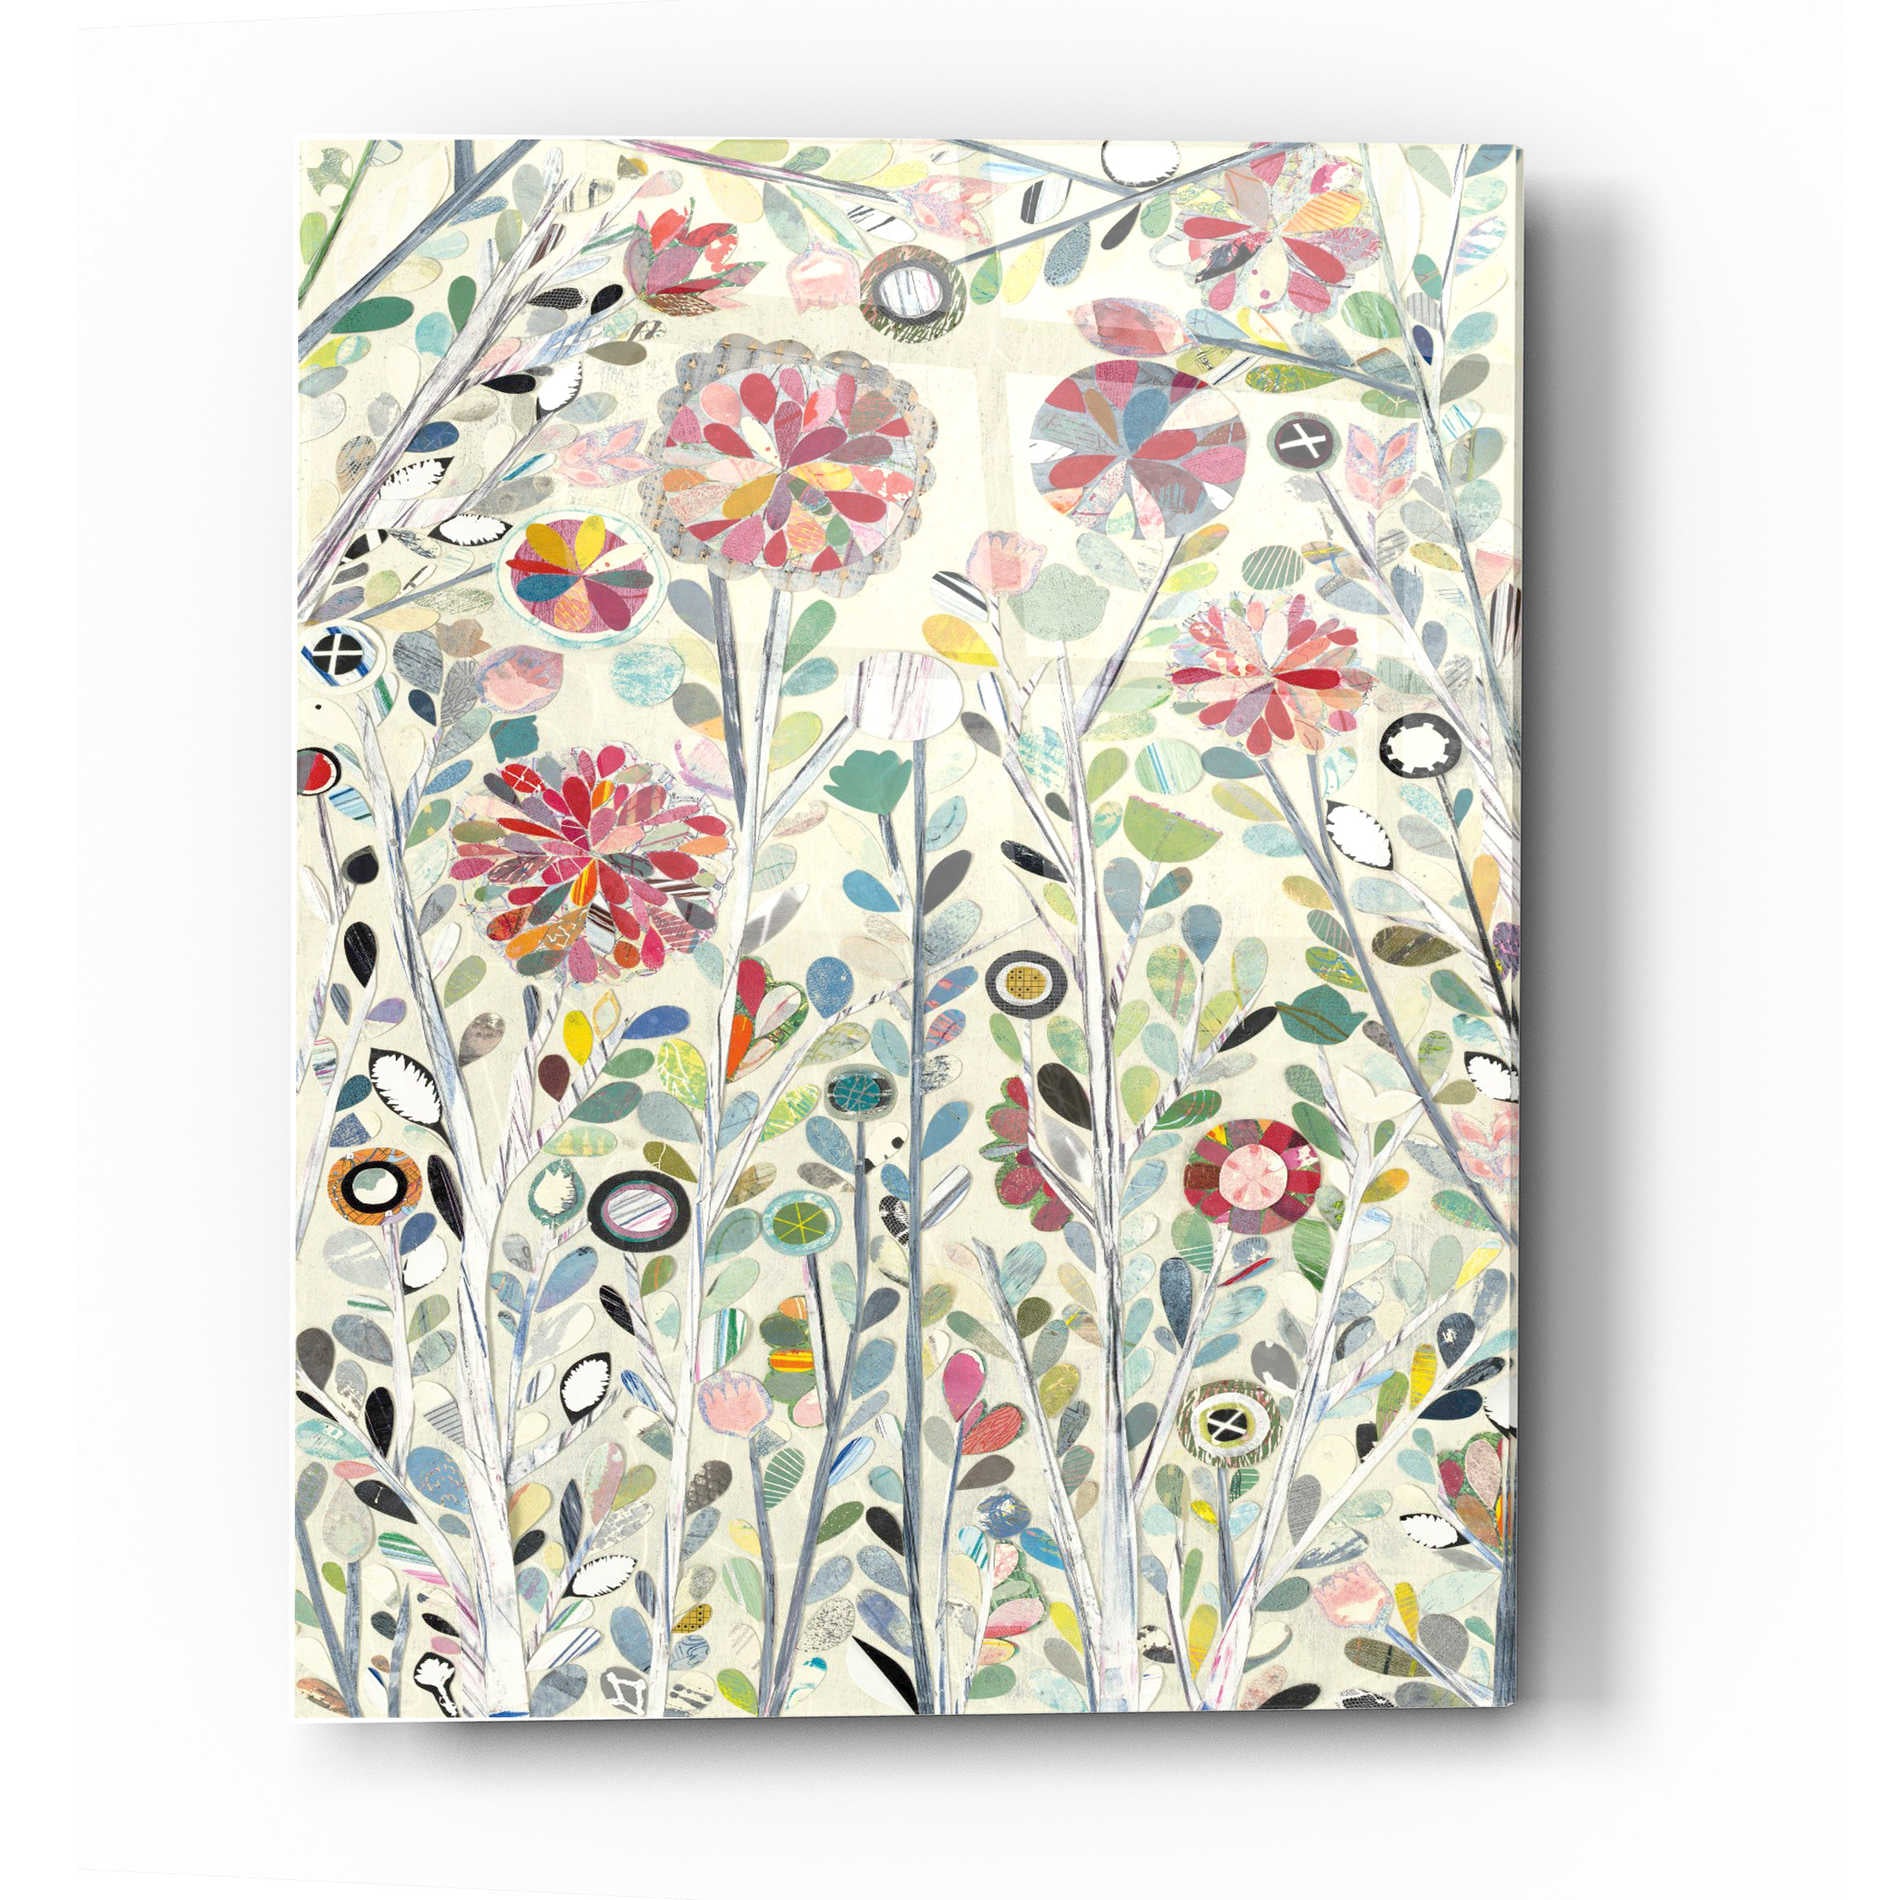 Epic Art 'Spring Blossoms' by Candra Boggs, Acrylic Glass Wall Art